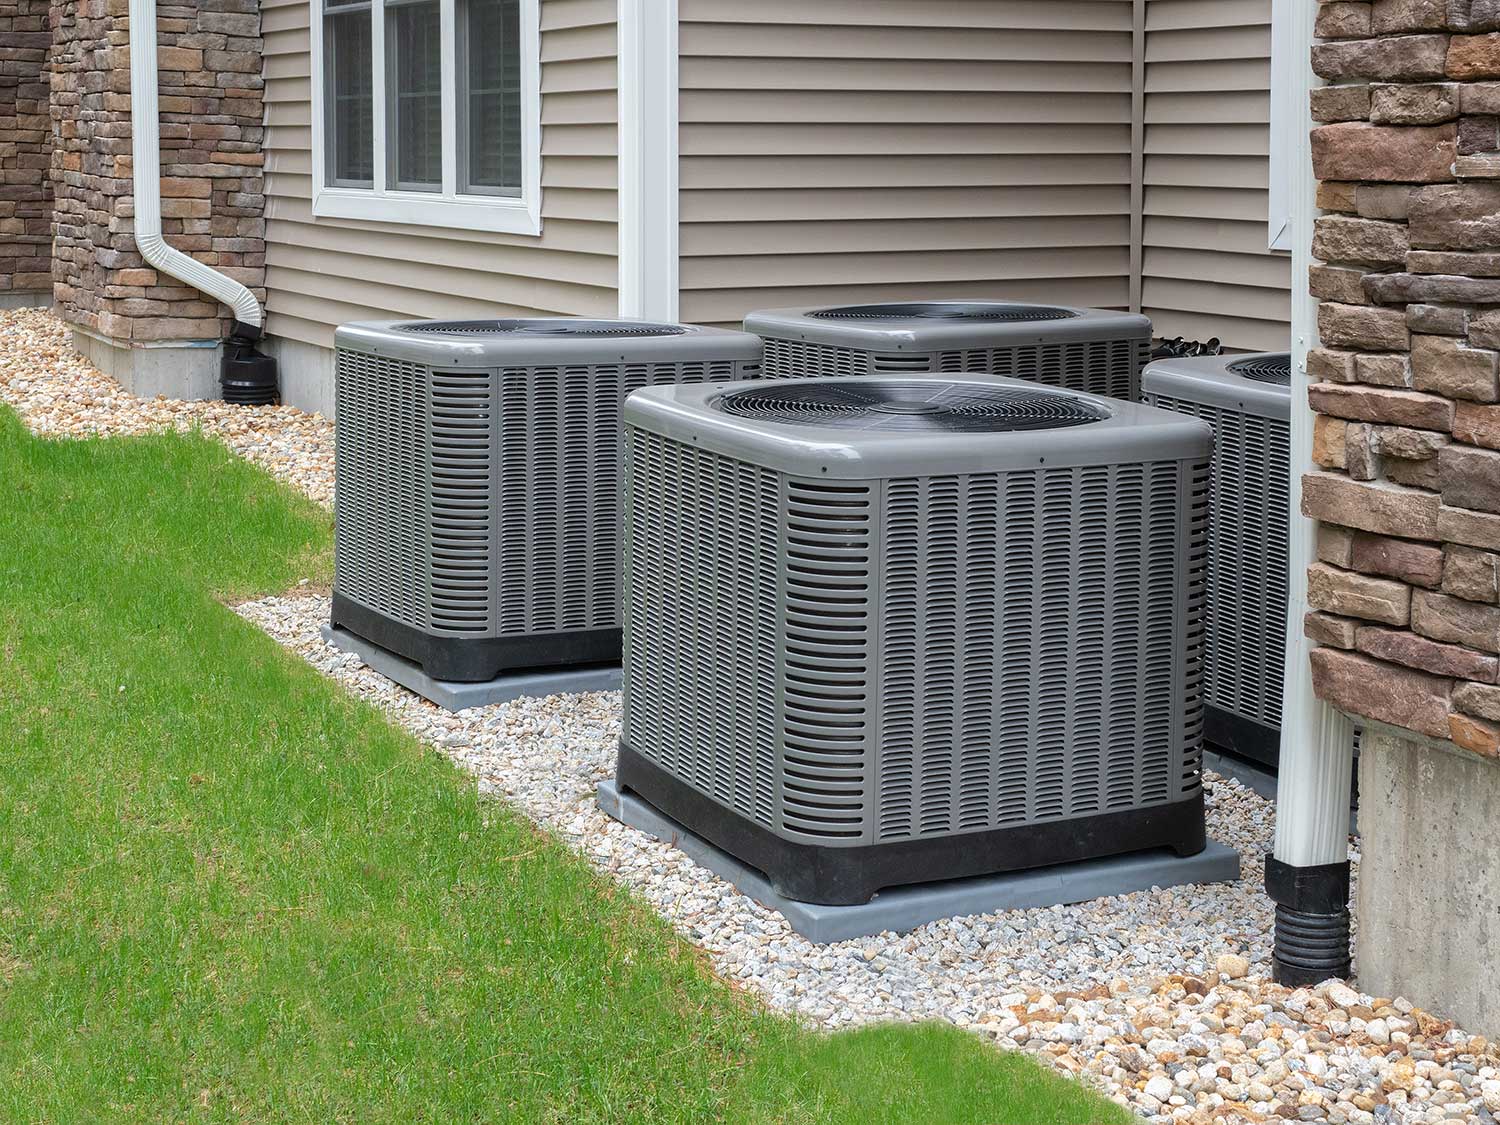 Air conditioners needed in new sites